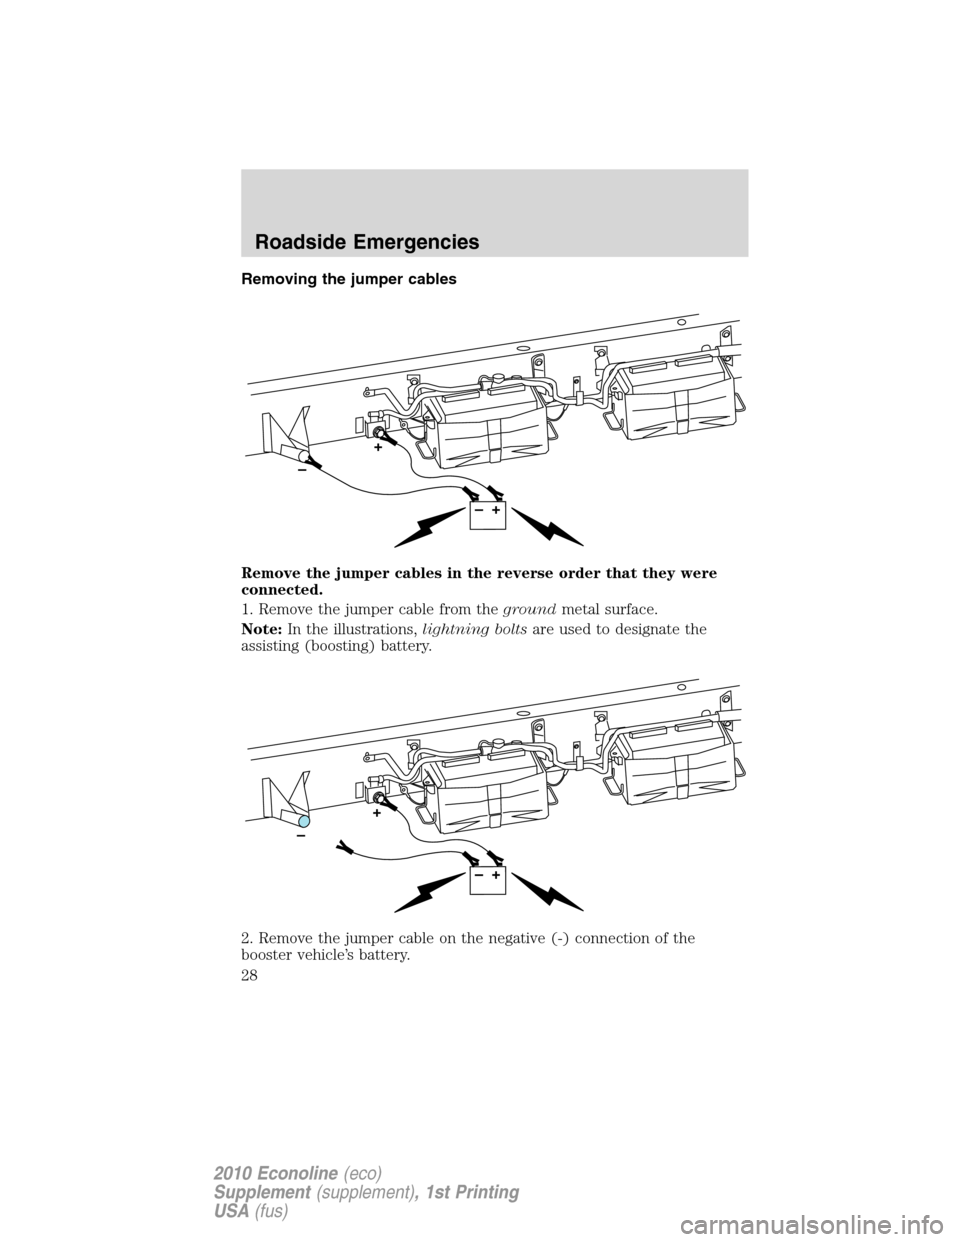 FORD SUPER DUTY 2010 2.G Diesel Supplement Manual Removing the jumper cables
Remove the jumper cables in the reverse order that they were
connected.
1. Remove the jumper cable from thegroundmetal surface.
Note:In the illustrations,lightning boltsare 